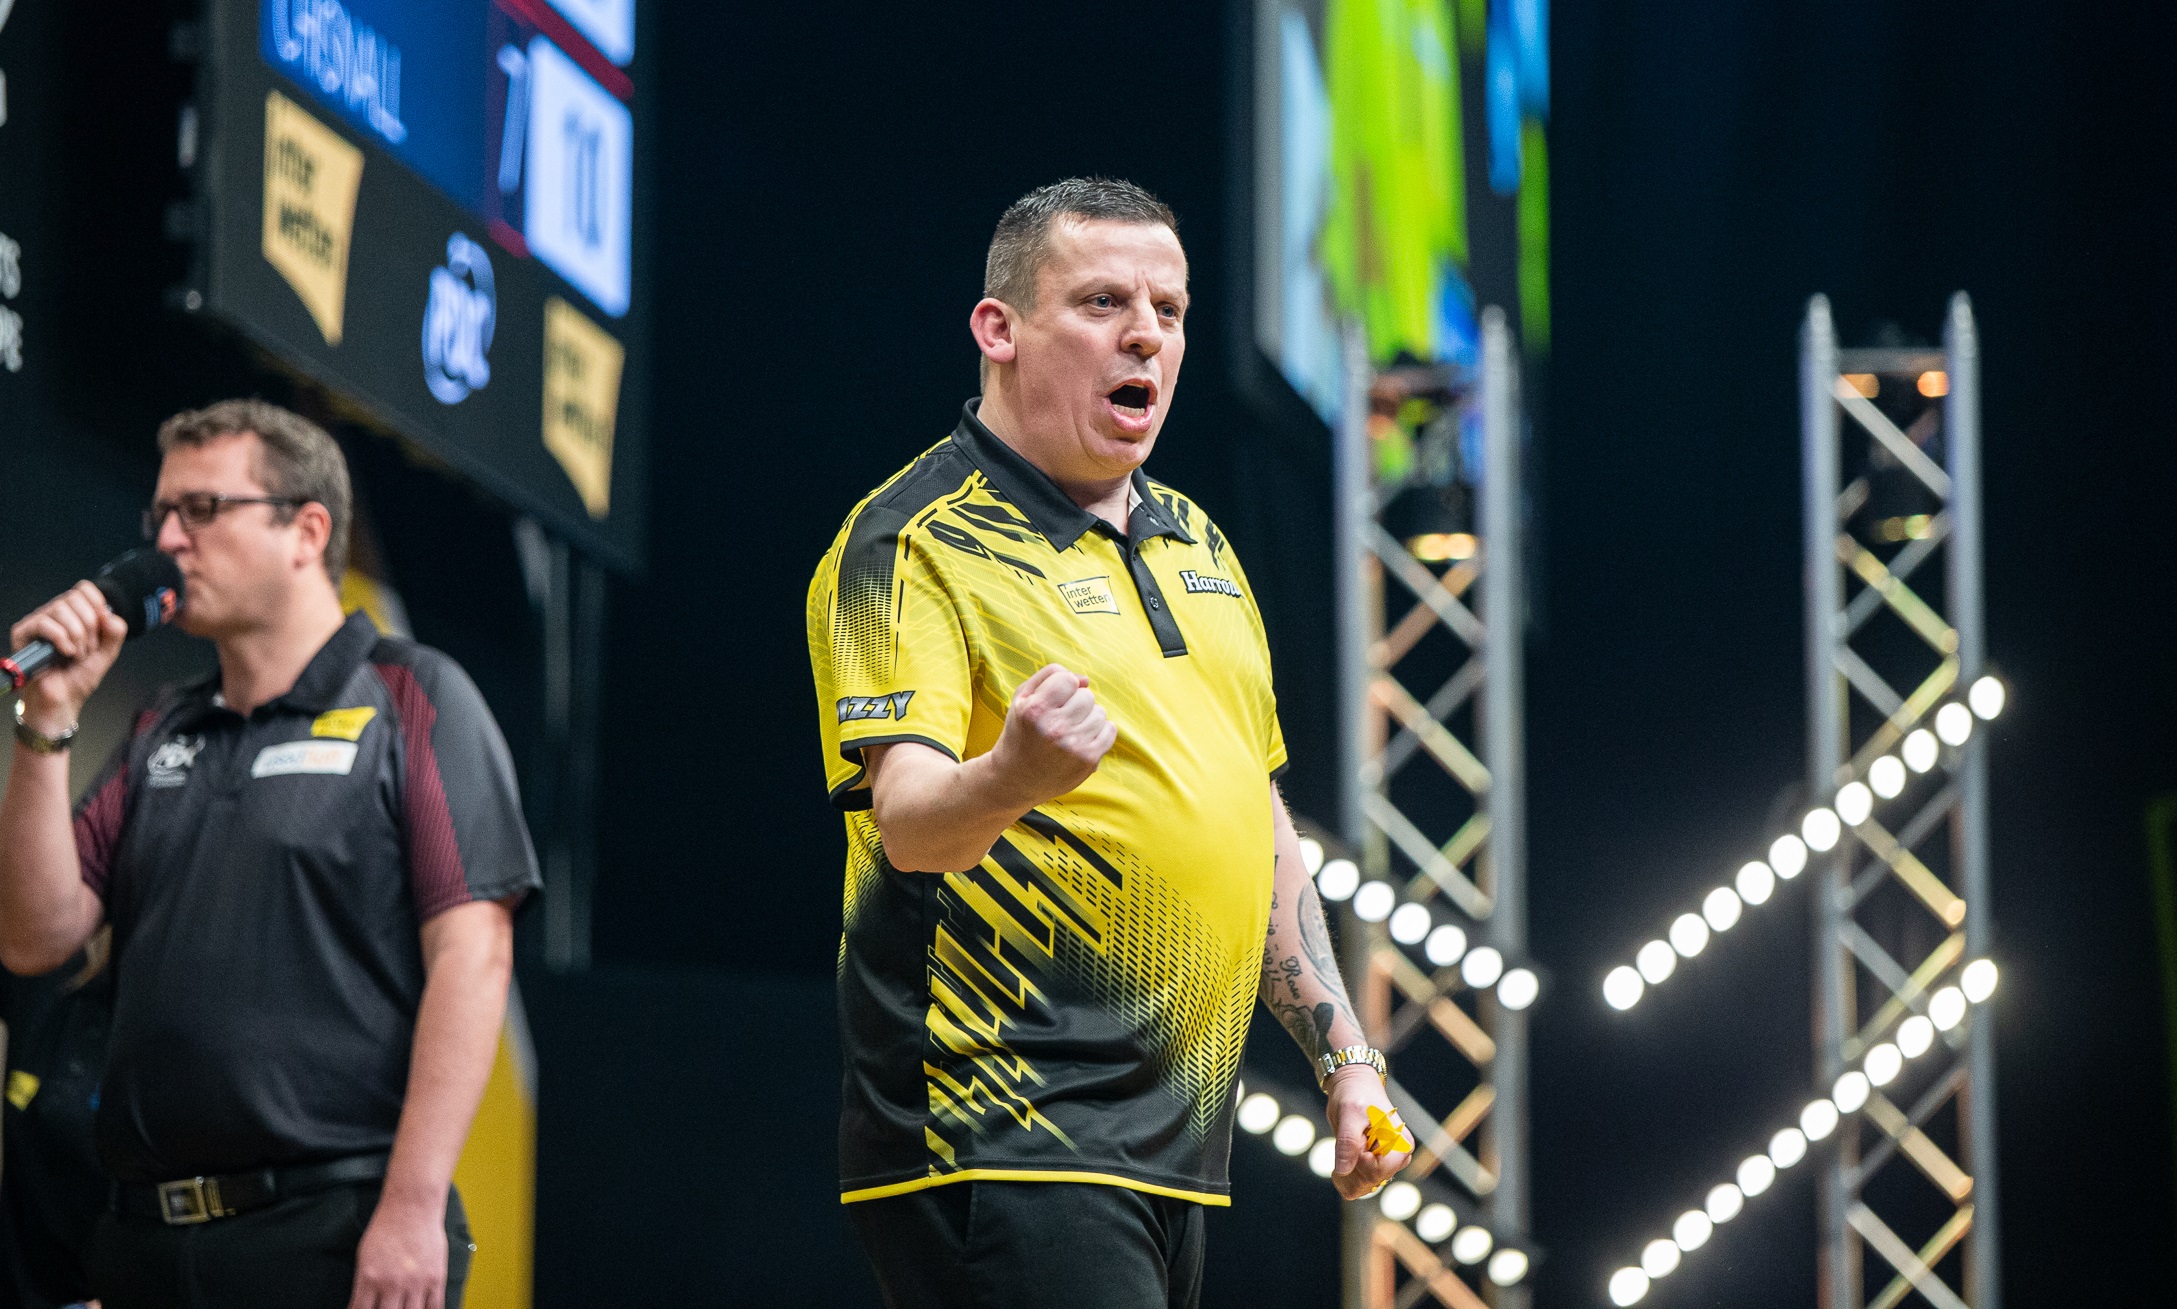 Chisnall won the Baltic Darts Open in February